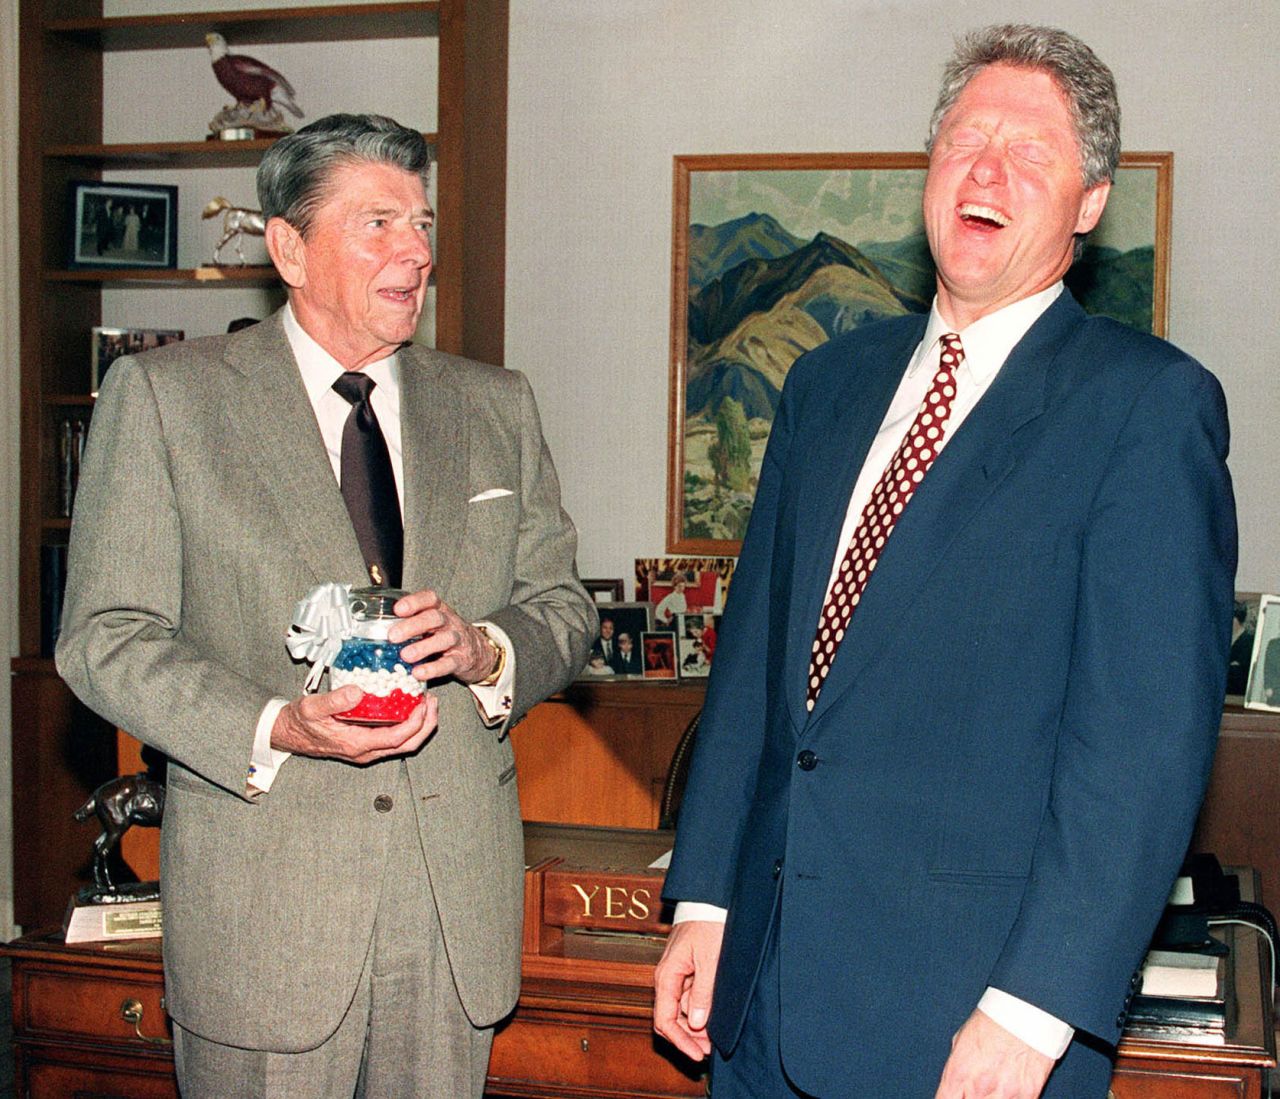 Former President Ronald Reagan presents Clinton with a jar of red, white and blue jelly beans in Los Angeles in November 1992. Reagan said they kept him from smoking cigarettes.